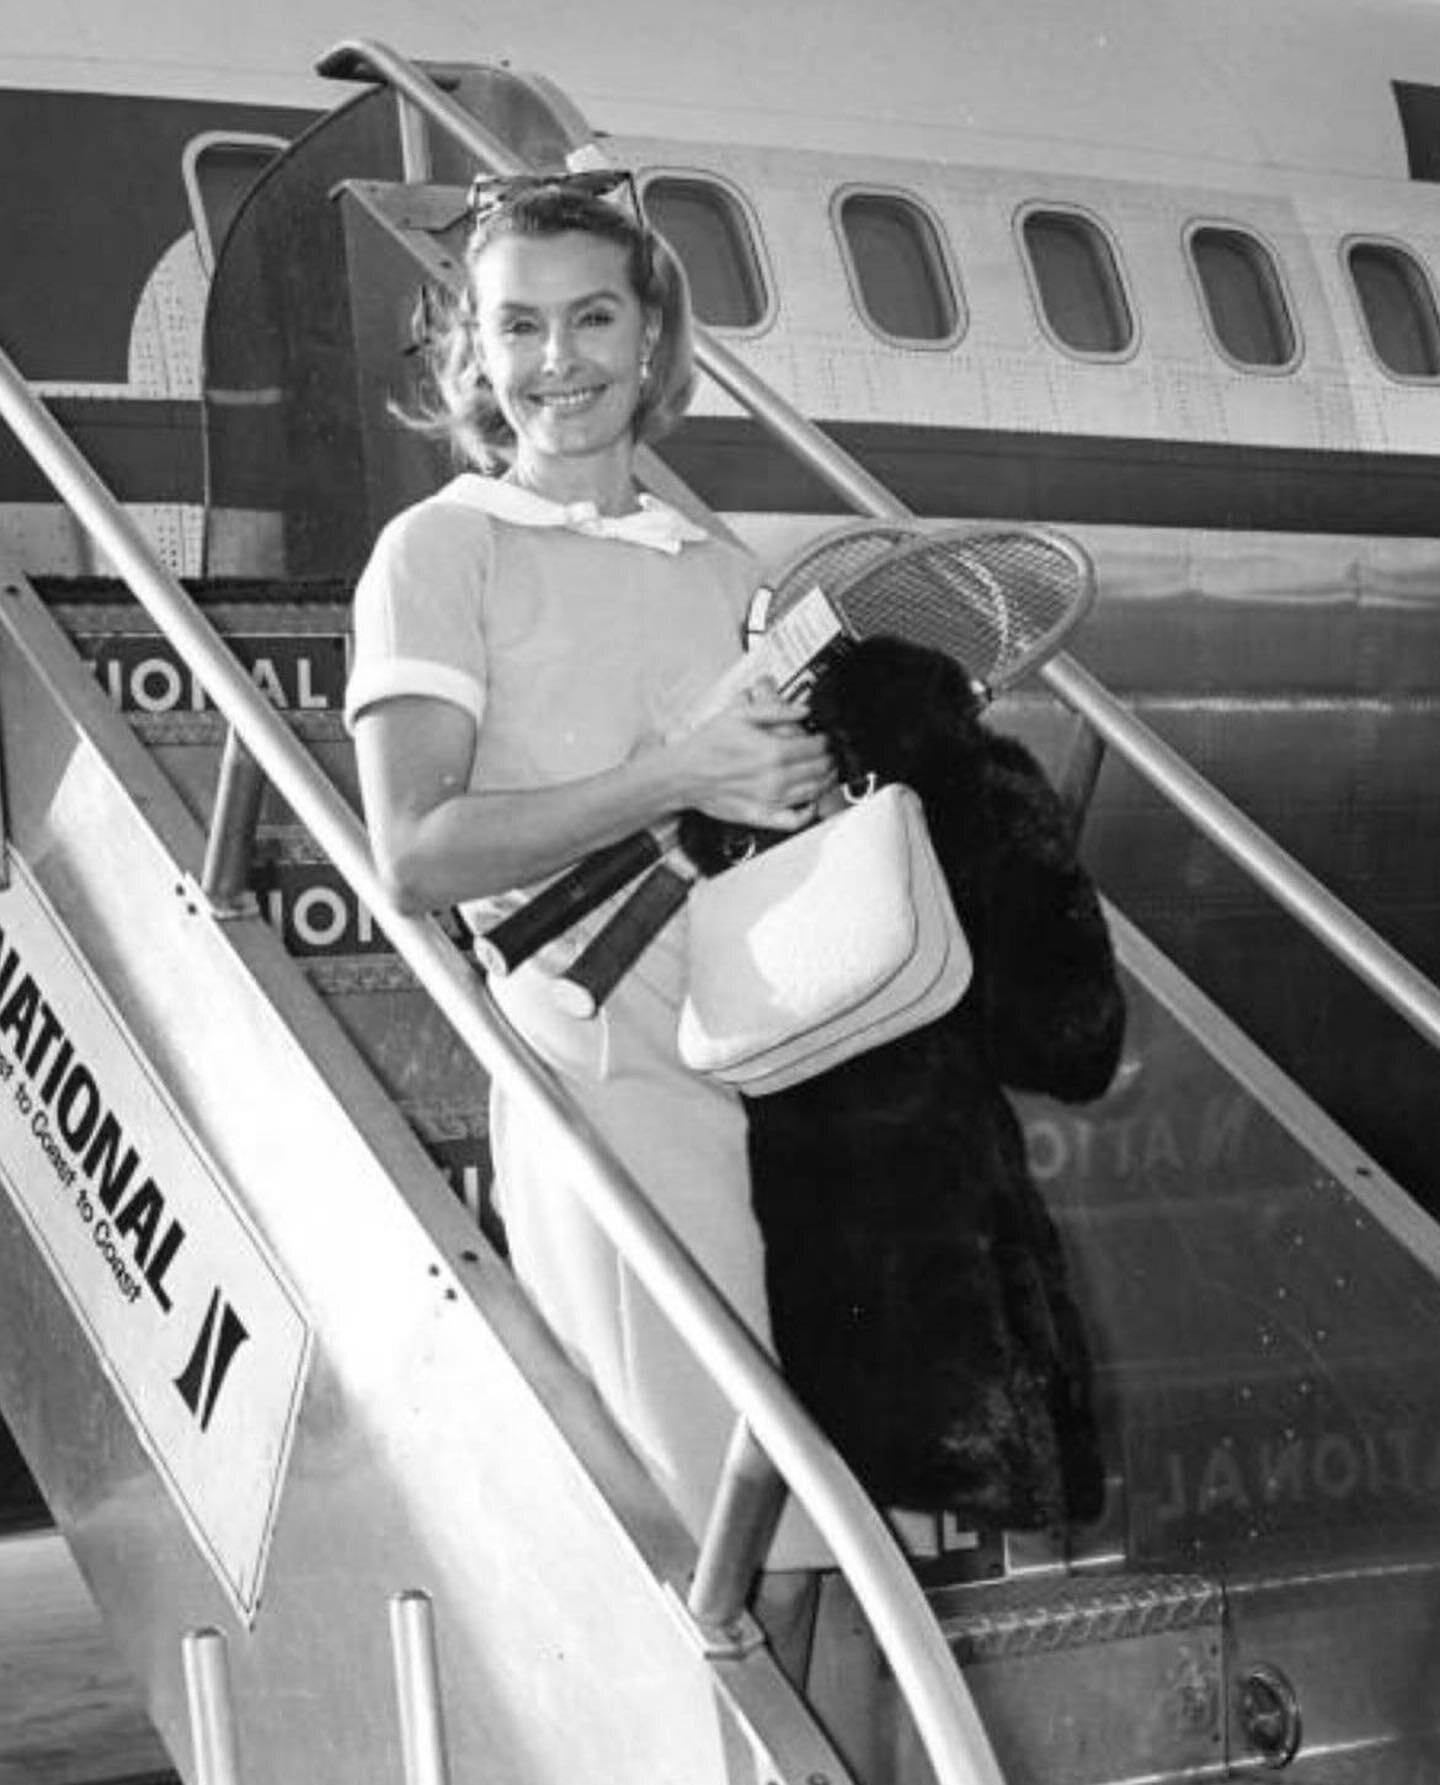 Happy International Women&rsquo;s Day!

We love this throwback photo of Dina Merrill at Palm Beach International Airport from the 1960s.